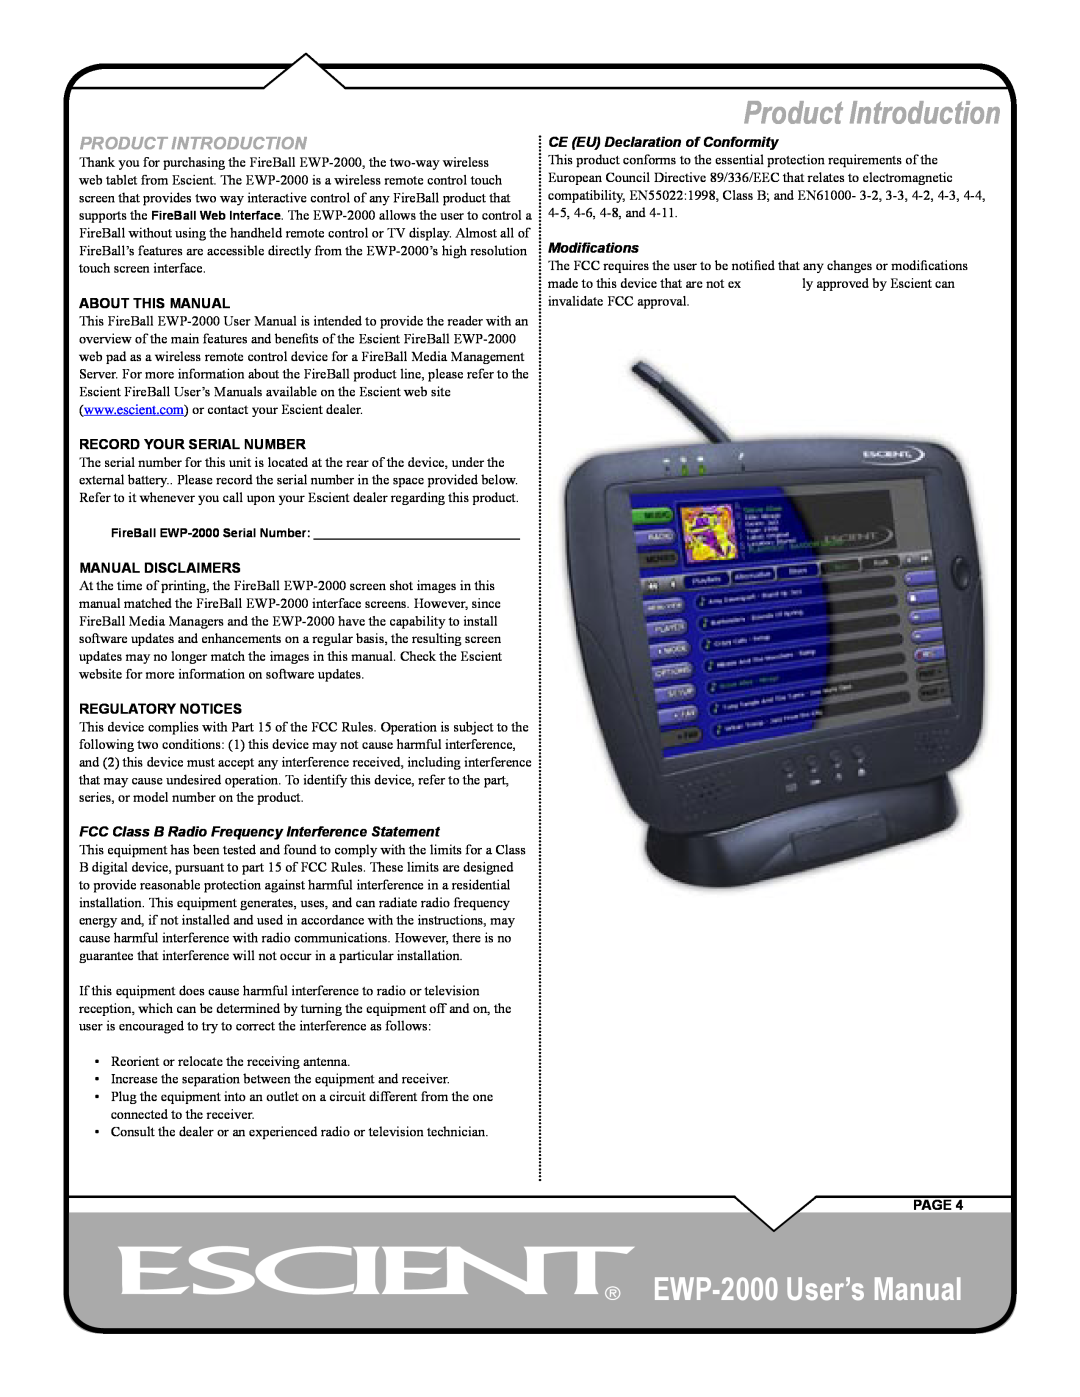 Escient Product Introduction, EWP-2000 User’s Manual, About This Manual, Record Your Serial Number, Manual Disclaimers 